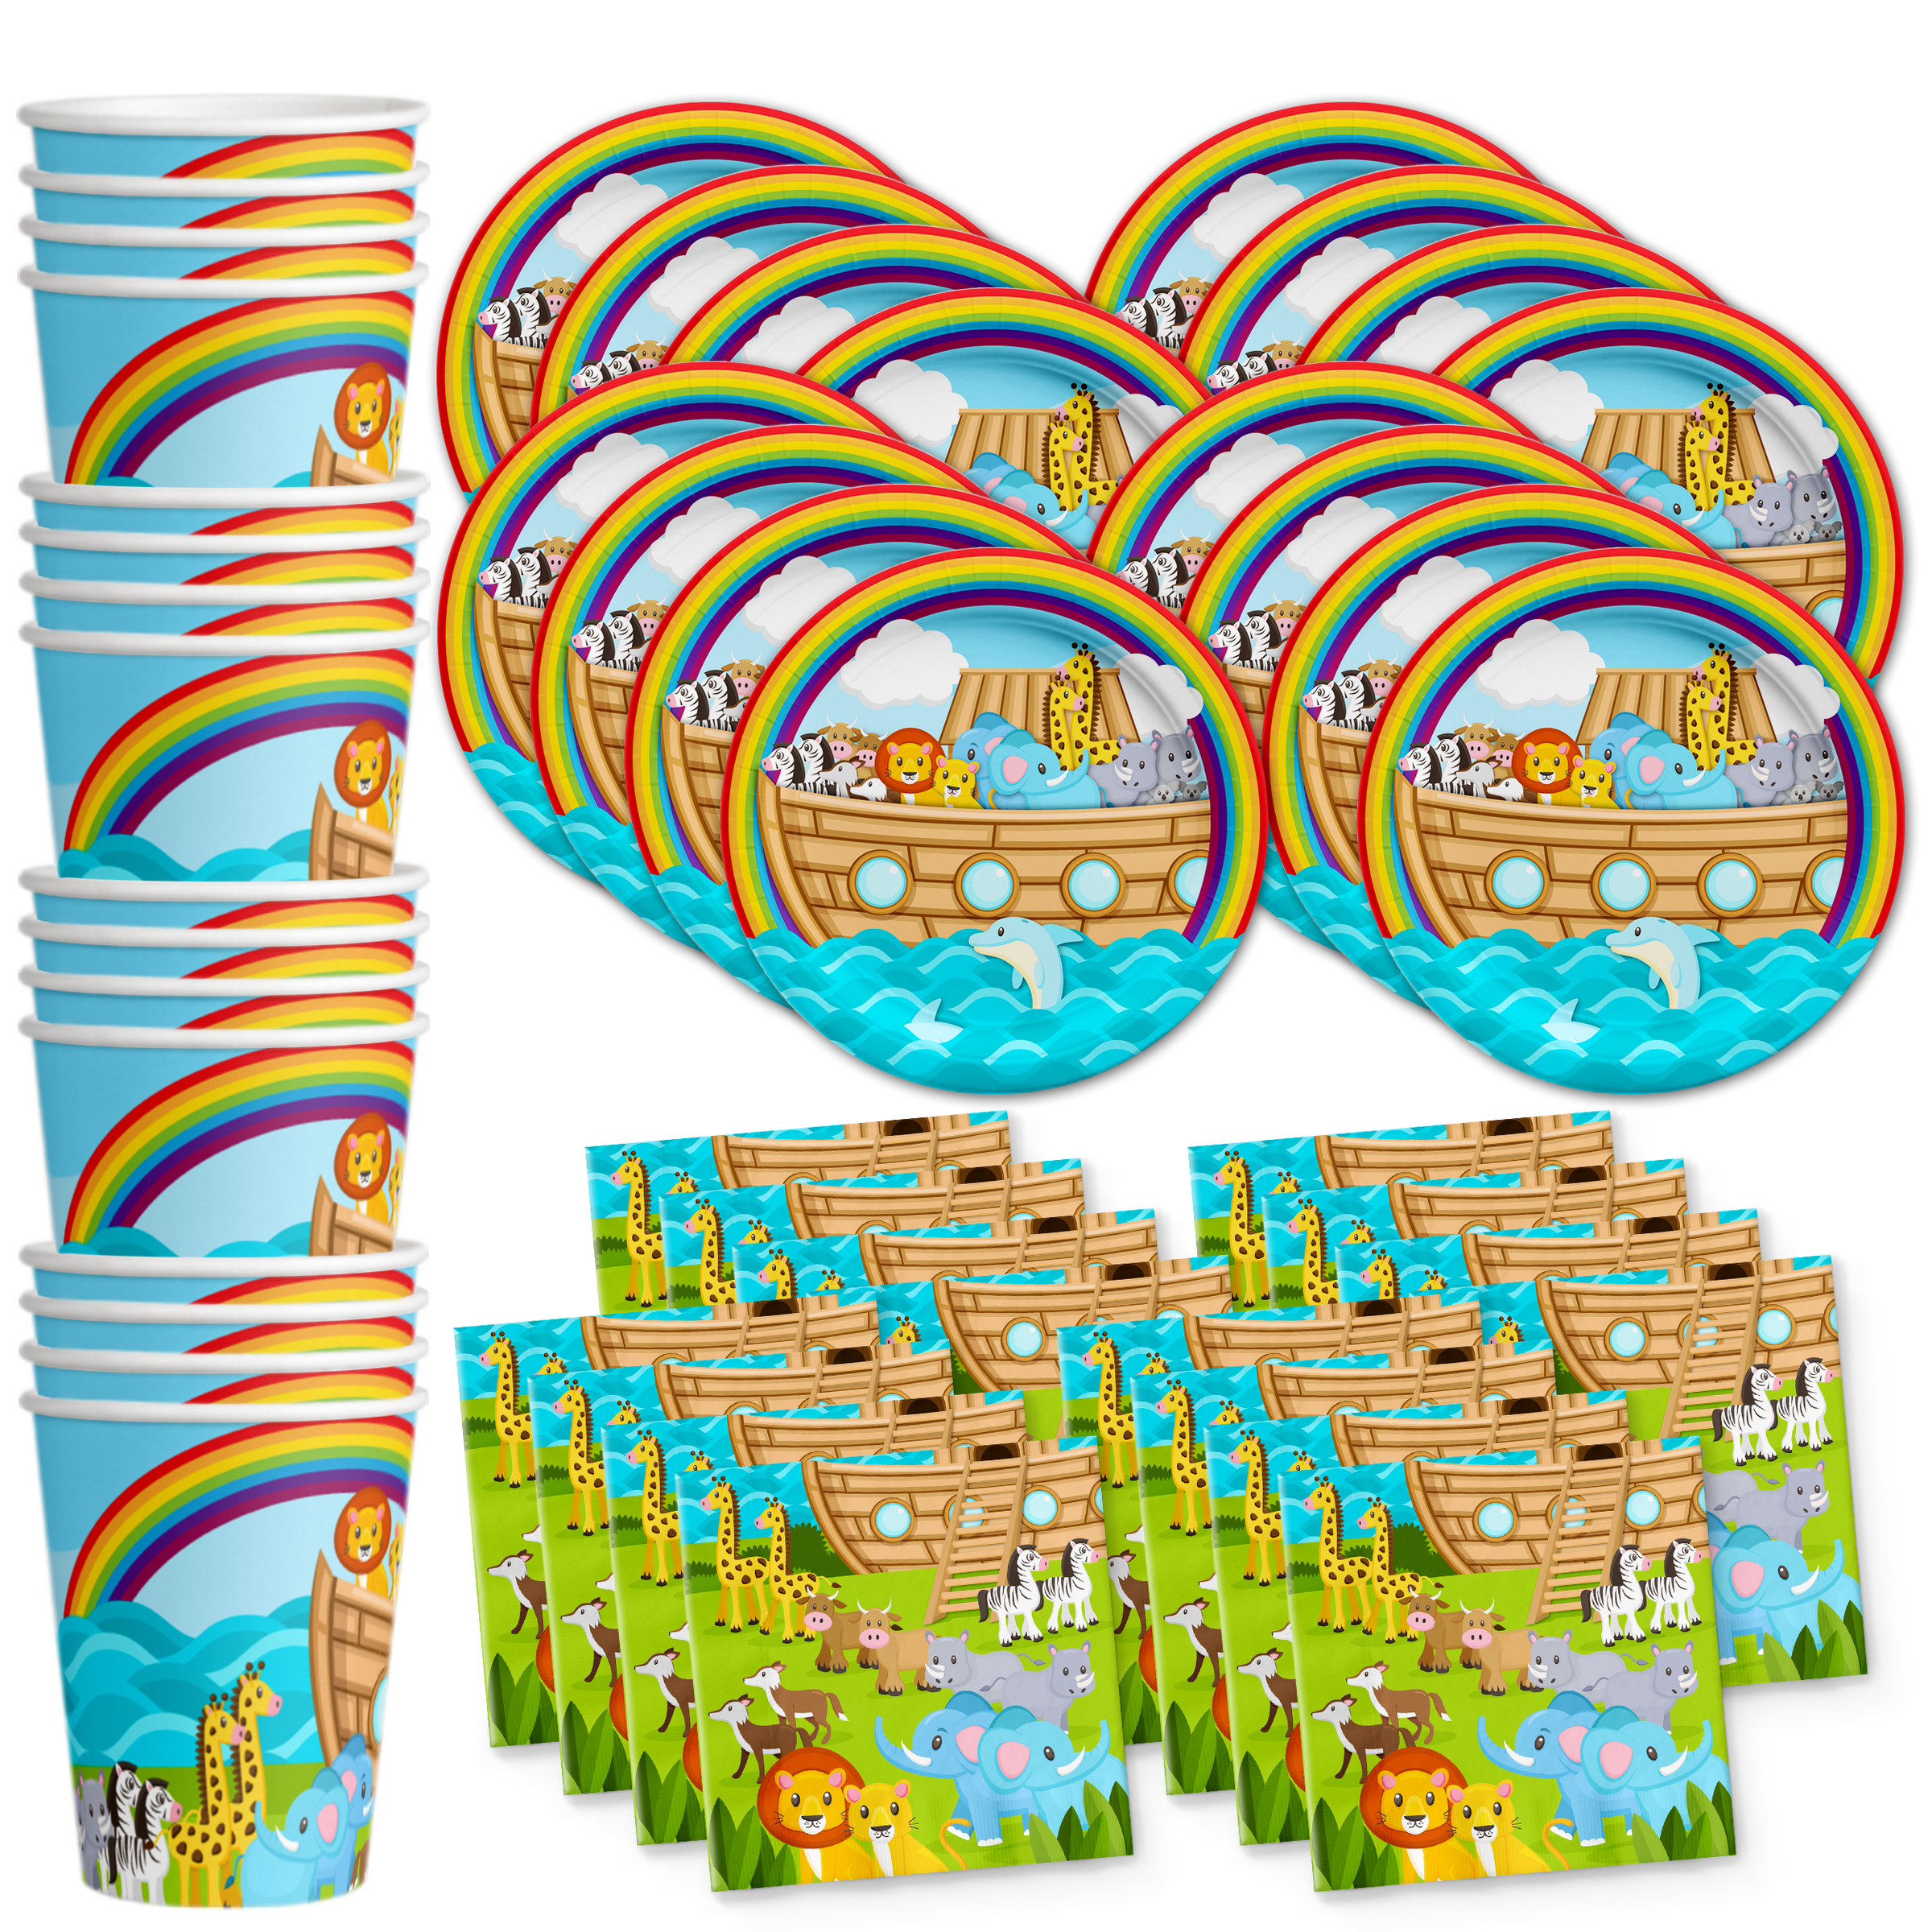 Noahs Ark Birthday Party Tableware Kit For 16 Guests - BirthdayGalore.com